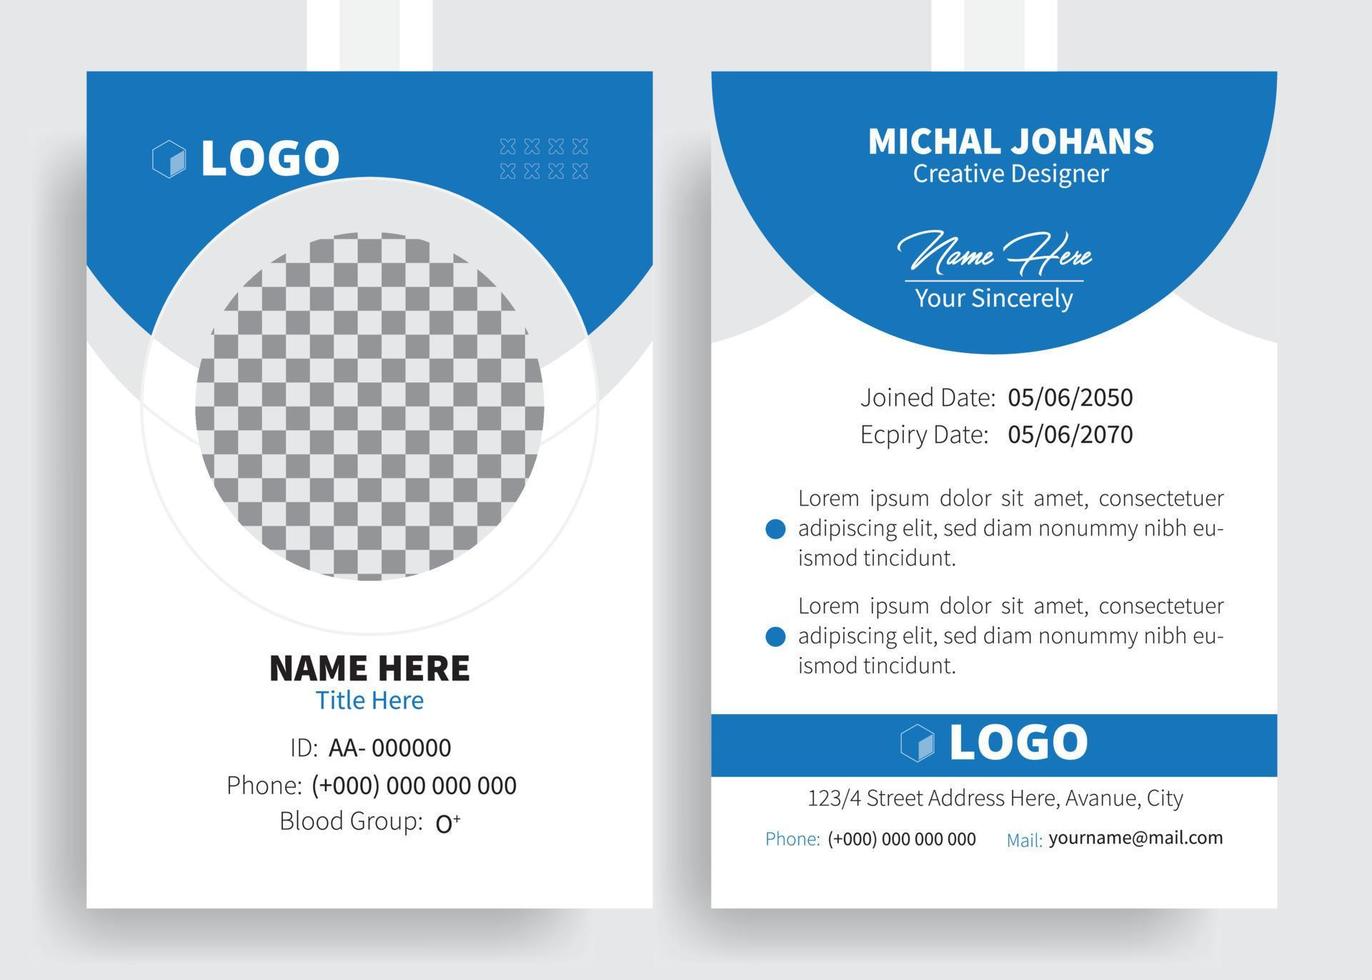 identification card Template Design, Modern ID Card Template with an author photo place, Office Id Card Layout, Employee Id Card for Your Business or Company  profile design. vector